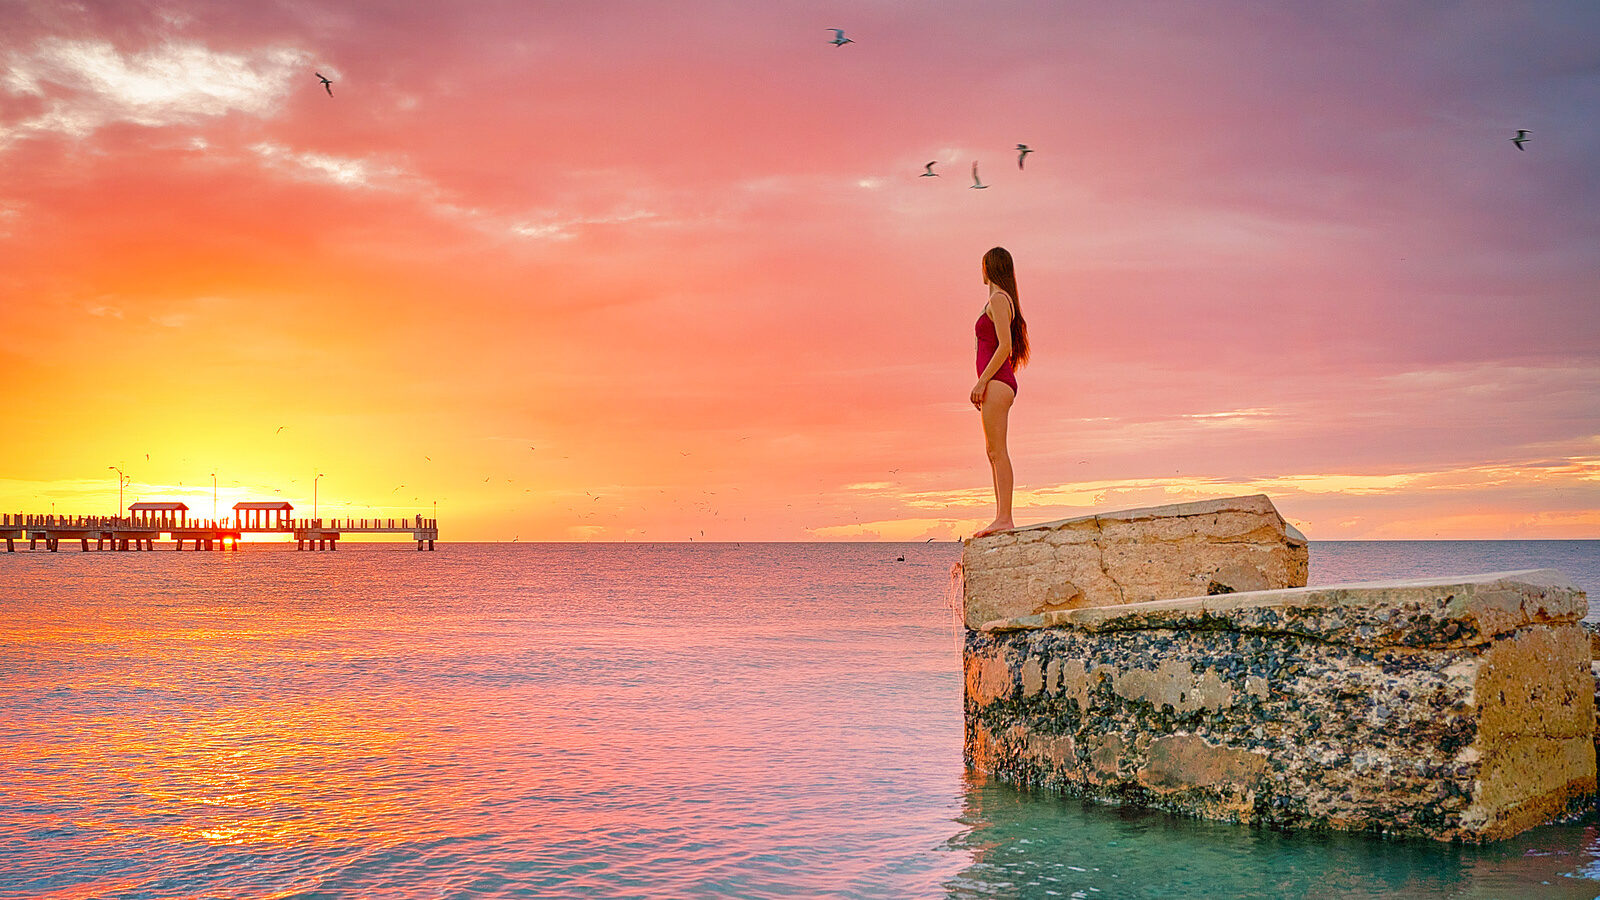 A woman in a red bathing suits stands atop an old piece of a fort on a coastline, offering perspective of one of the most beautiful sunsets in Florida.